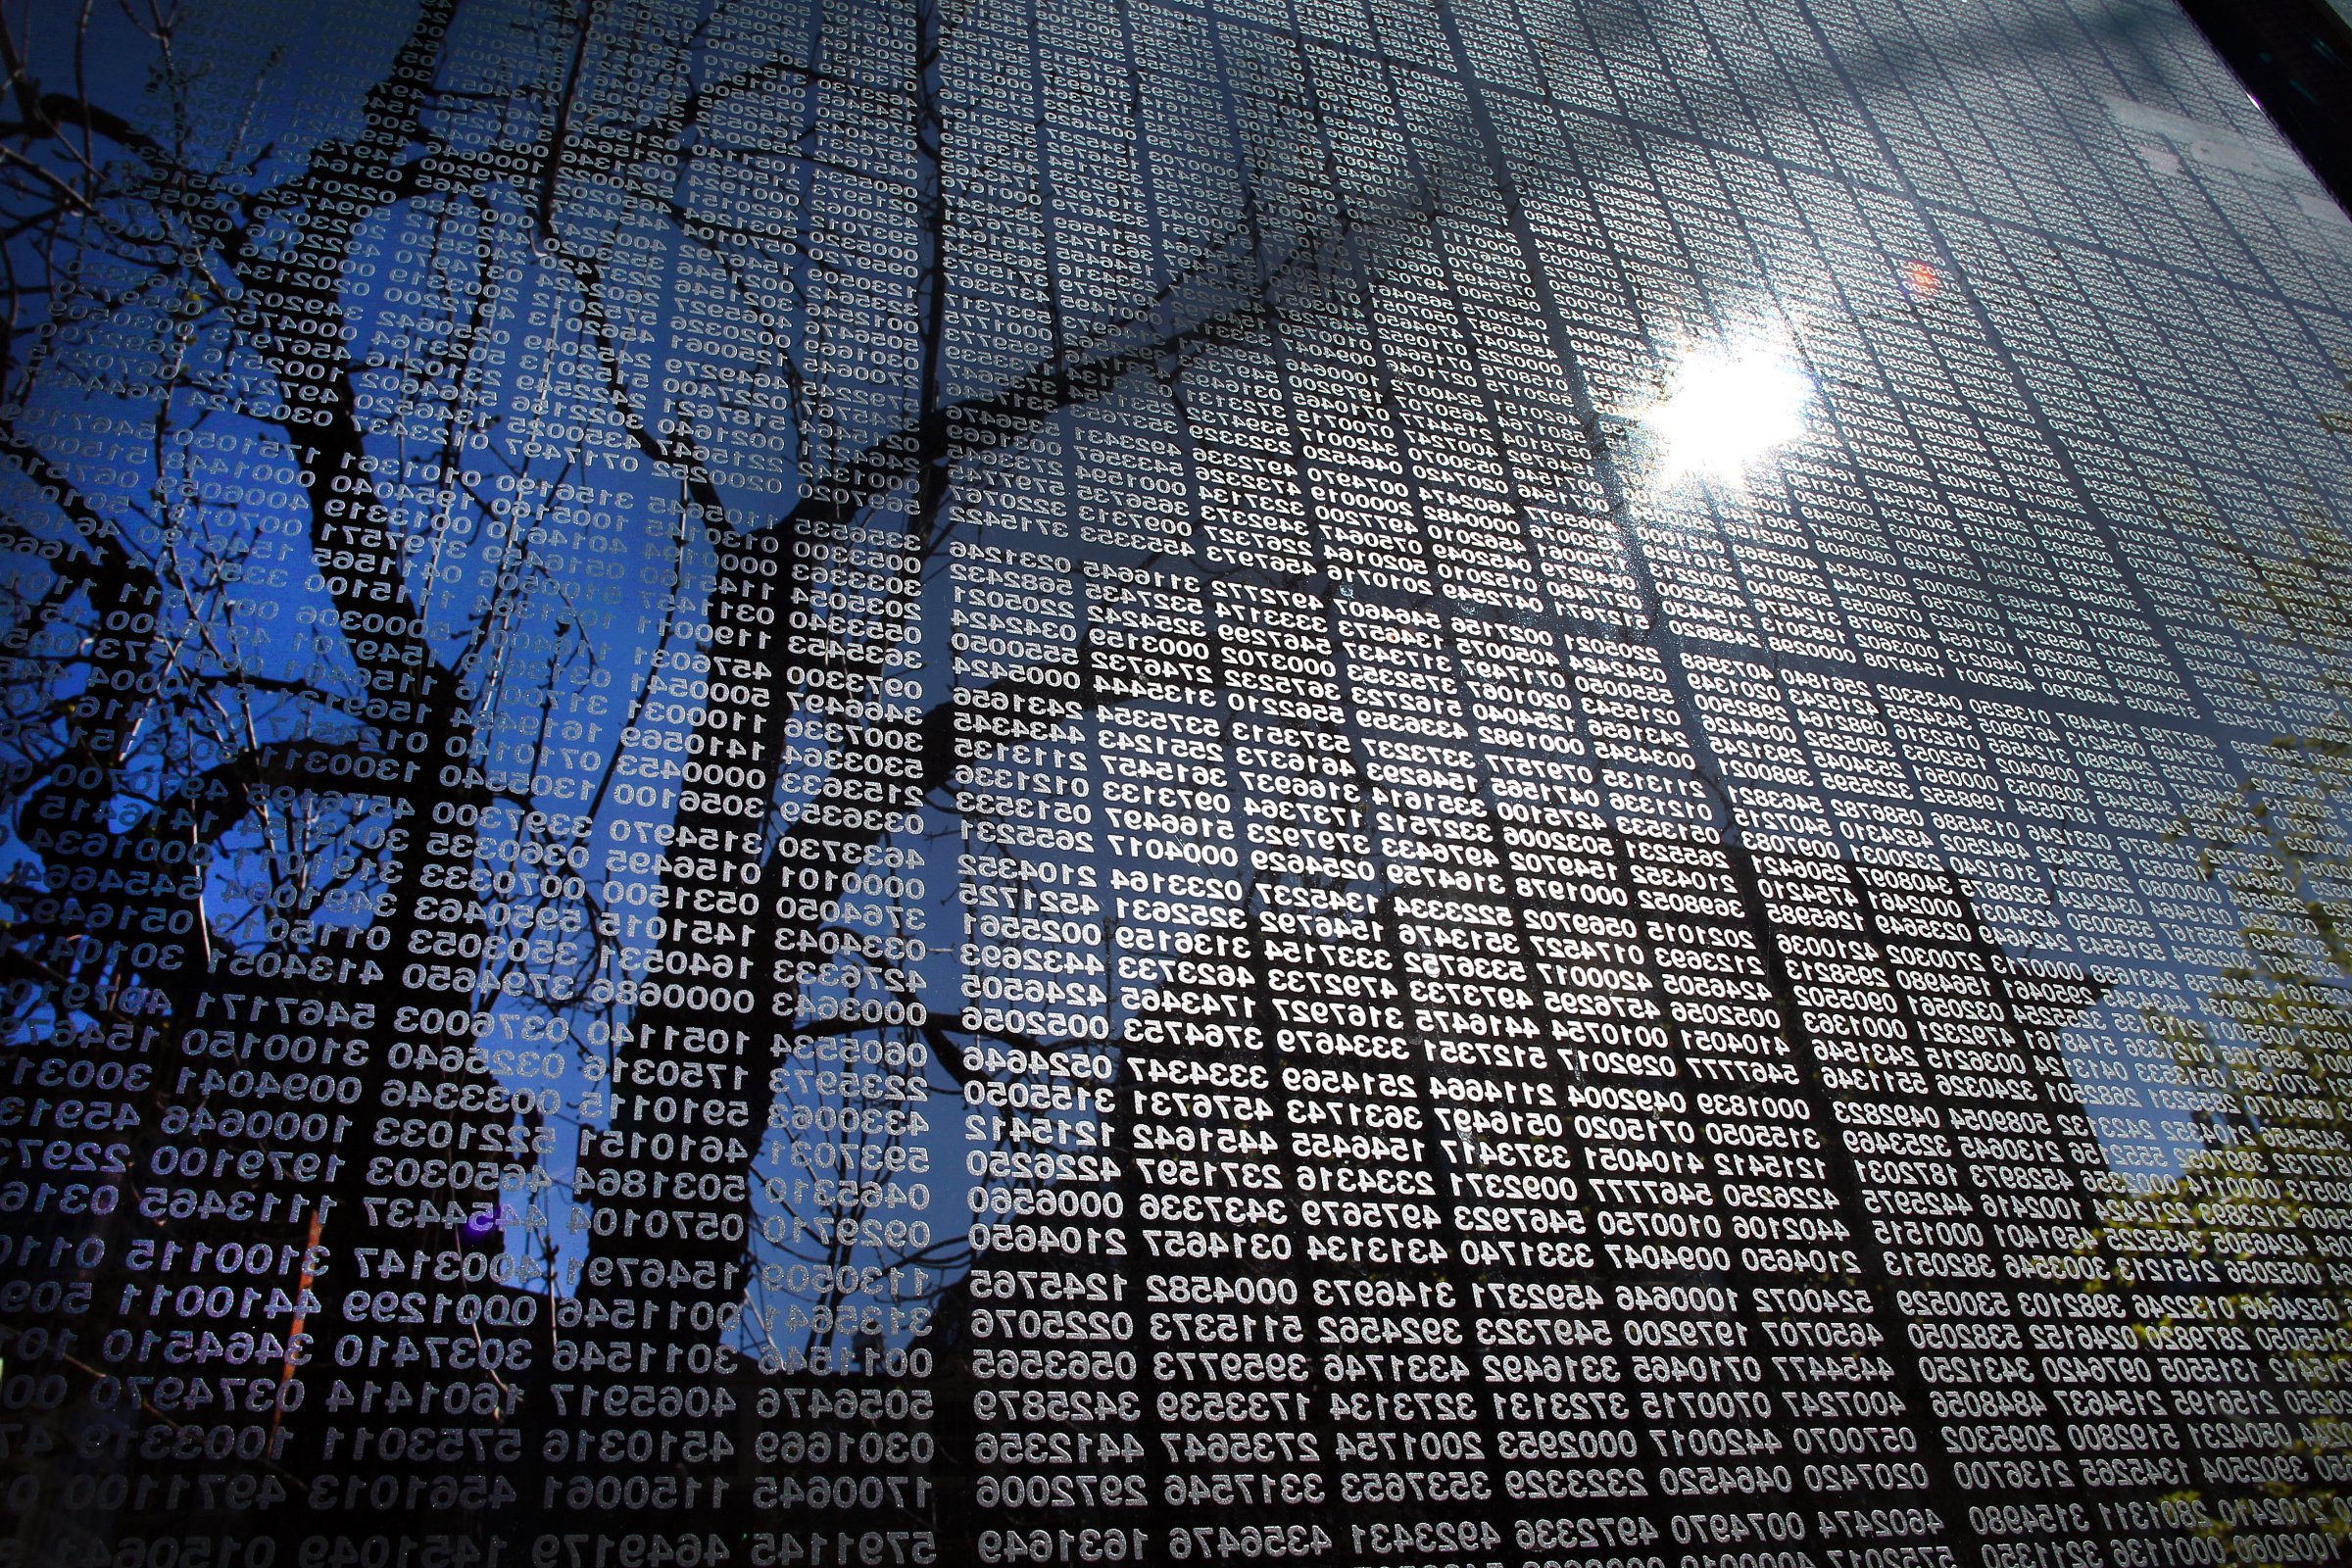 Boston-04/17/2012 The early morning suns shines onto the thousands of numbers of holocaust victims on one of the glass panels at the  Boston Holocaust Memorial on Congress Street. Thursday, April 19 is national Holocaust Day of Remembrance.  Boston Globe staff  Photo by John Tlumacki(metro)